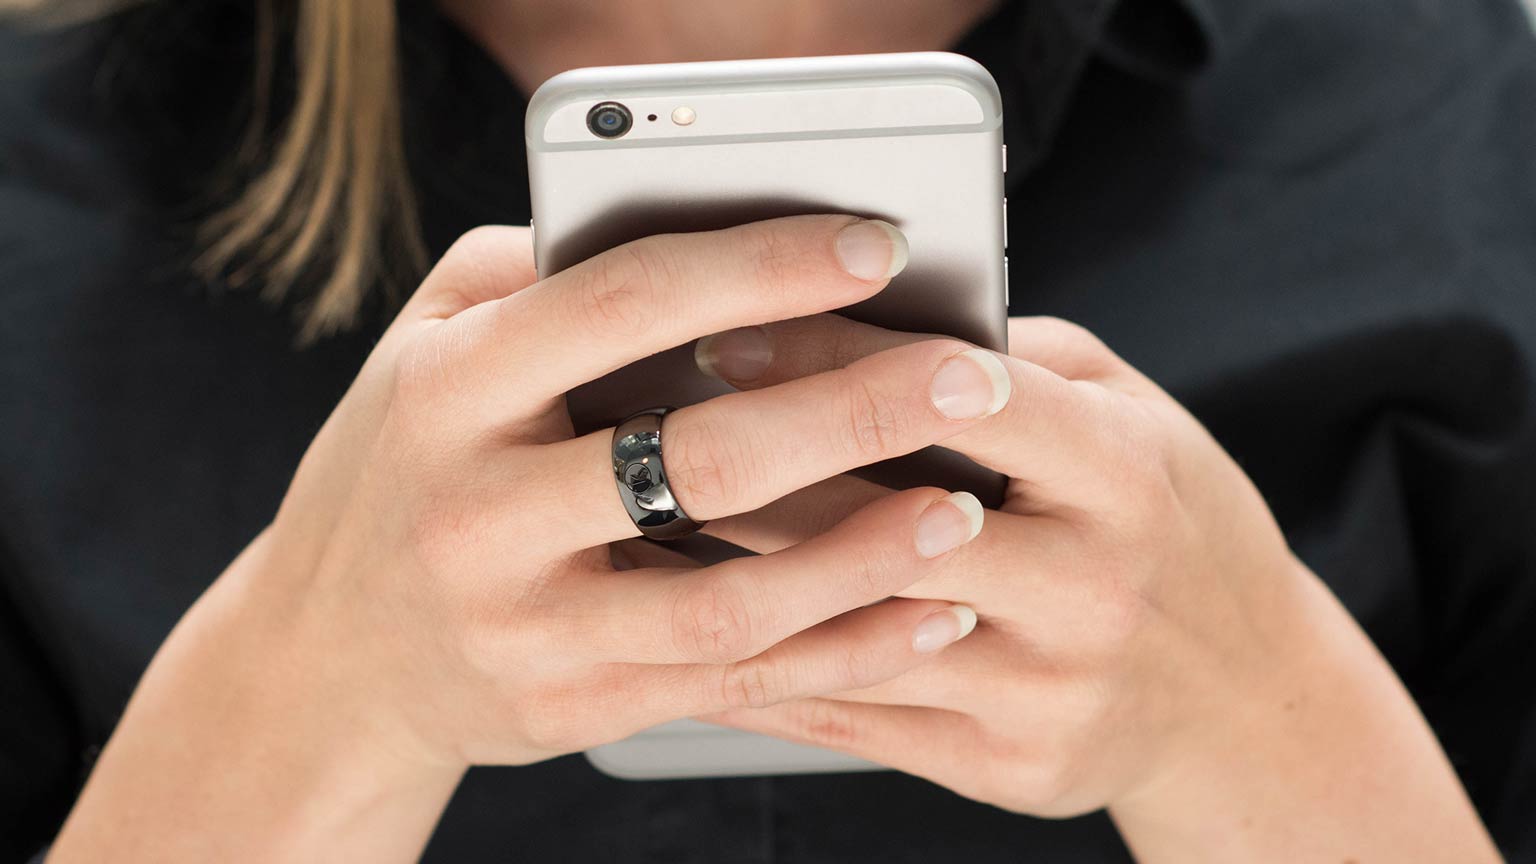 The $200 Motiv Ring Packs Fitness Tracking Into a Tiny Package